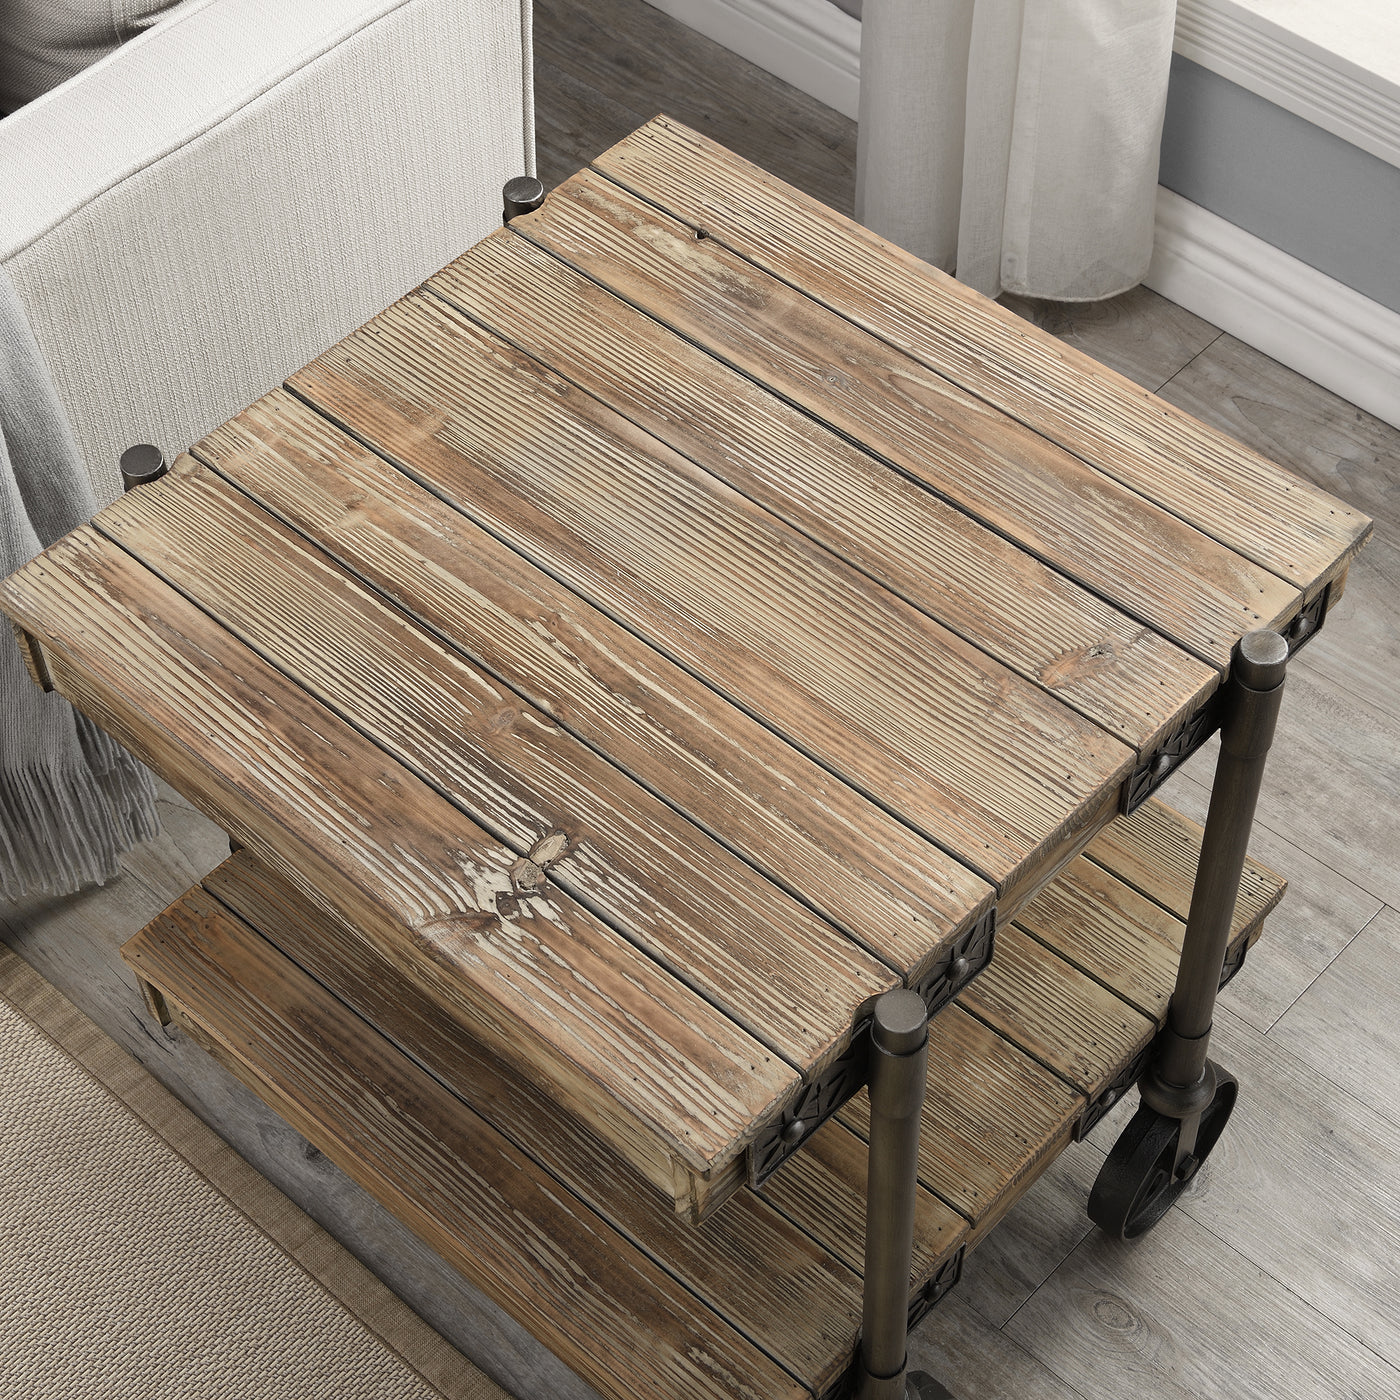 FirsTime & Co. Natural Bridgeport End Table, Farmhouse Style, Made of Wood